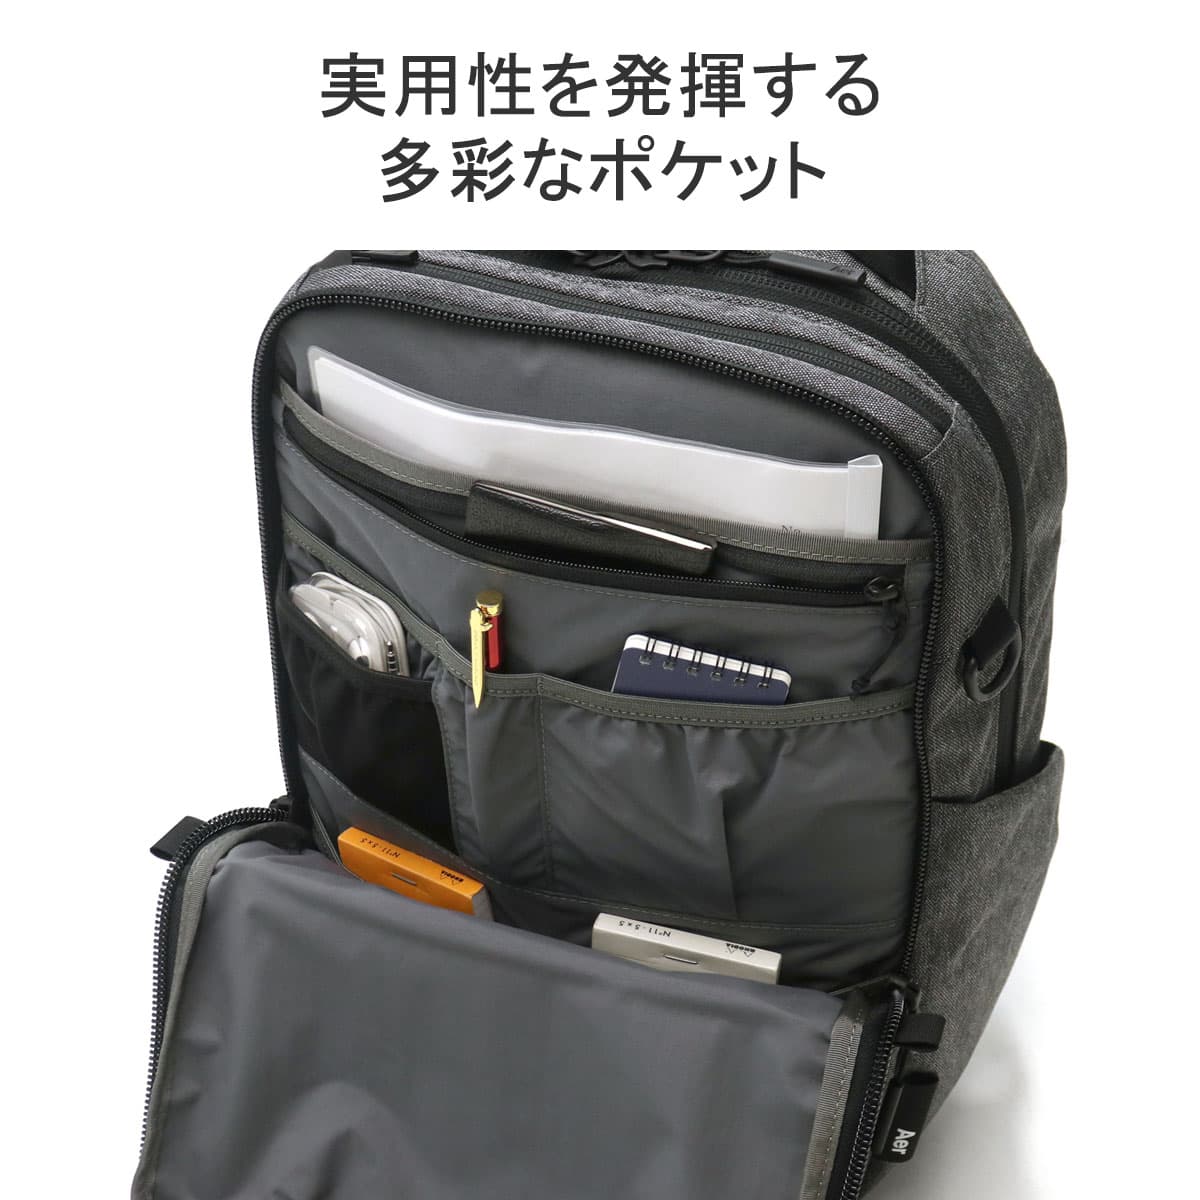 Aer エアー City Collection City Pack バックパック 14L｜【正規販売